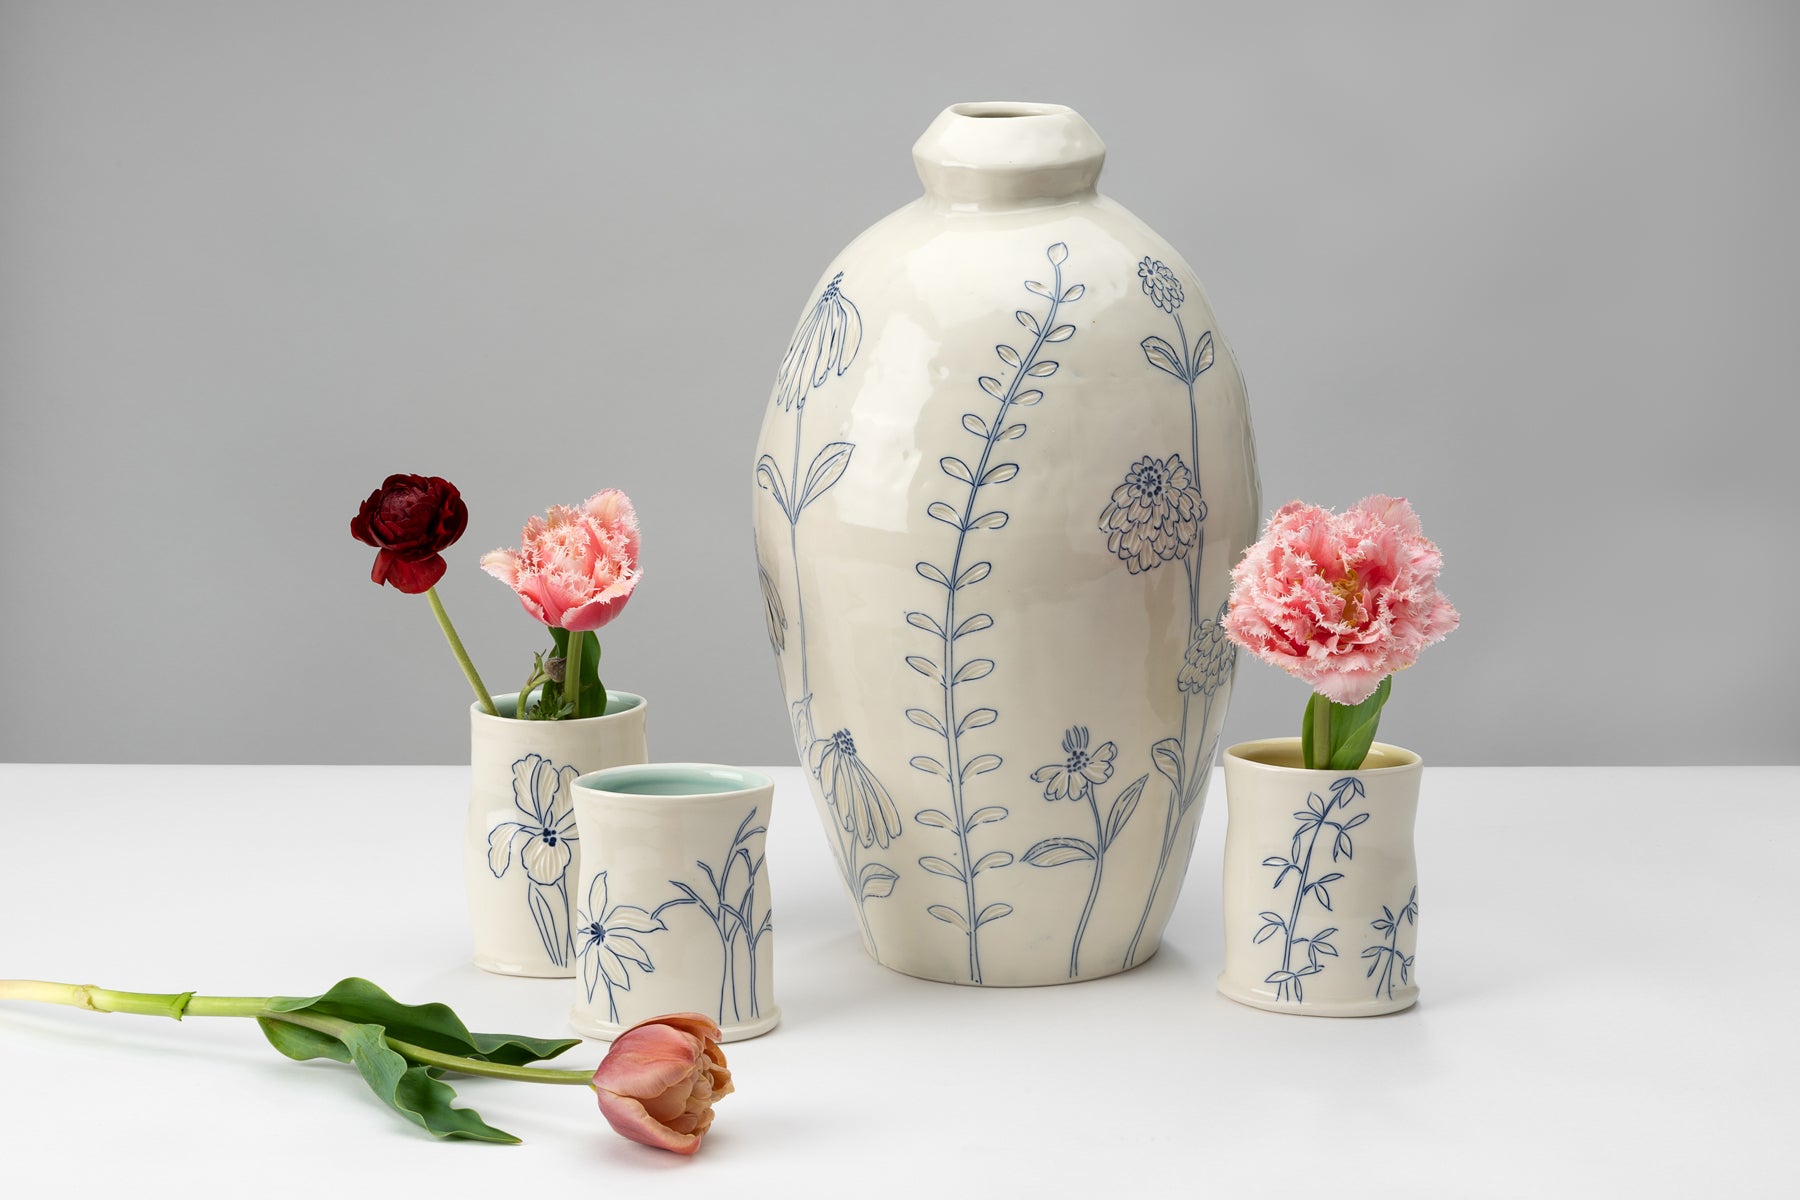 White and blue handmade porcelain pottery pieces by ceramic artist Julie Wiggins sit on a white table against a grey background and hold deep red and light pink flowers. Image by Loam